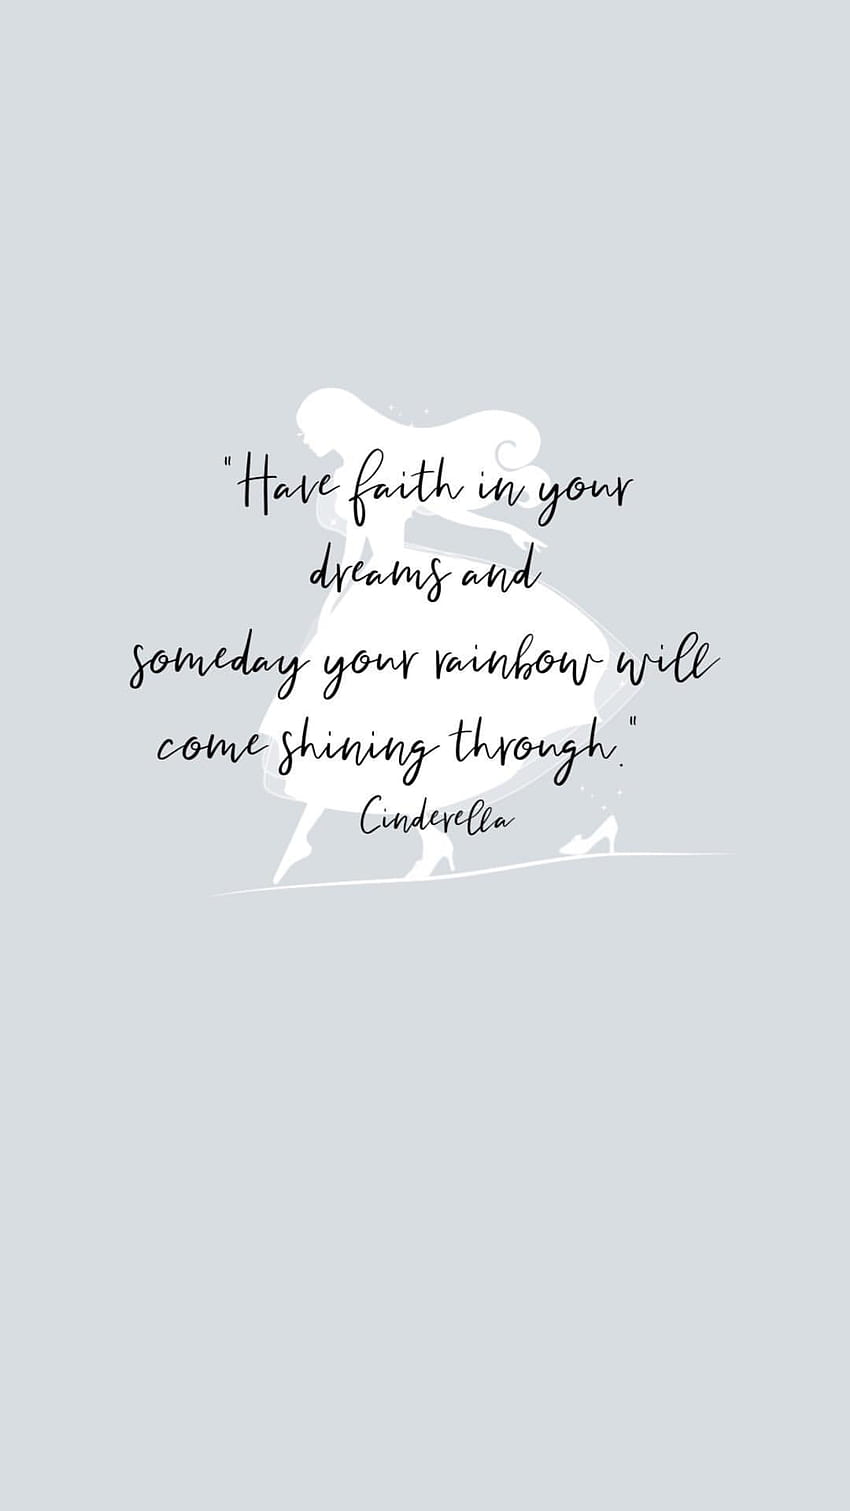 Have courage and be kind. Keep the faith. Disney princess HD phone wallpaper